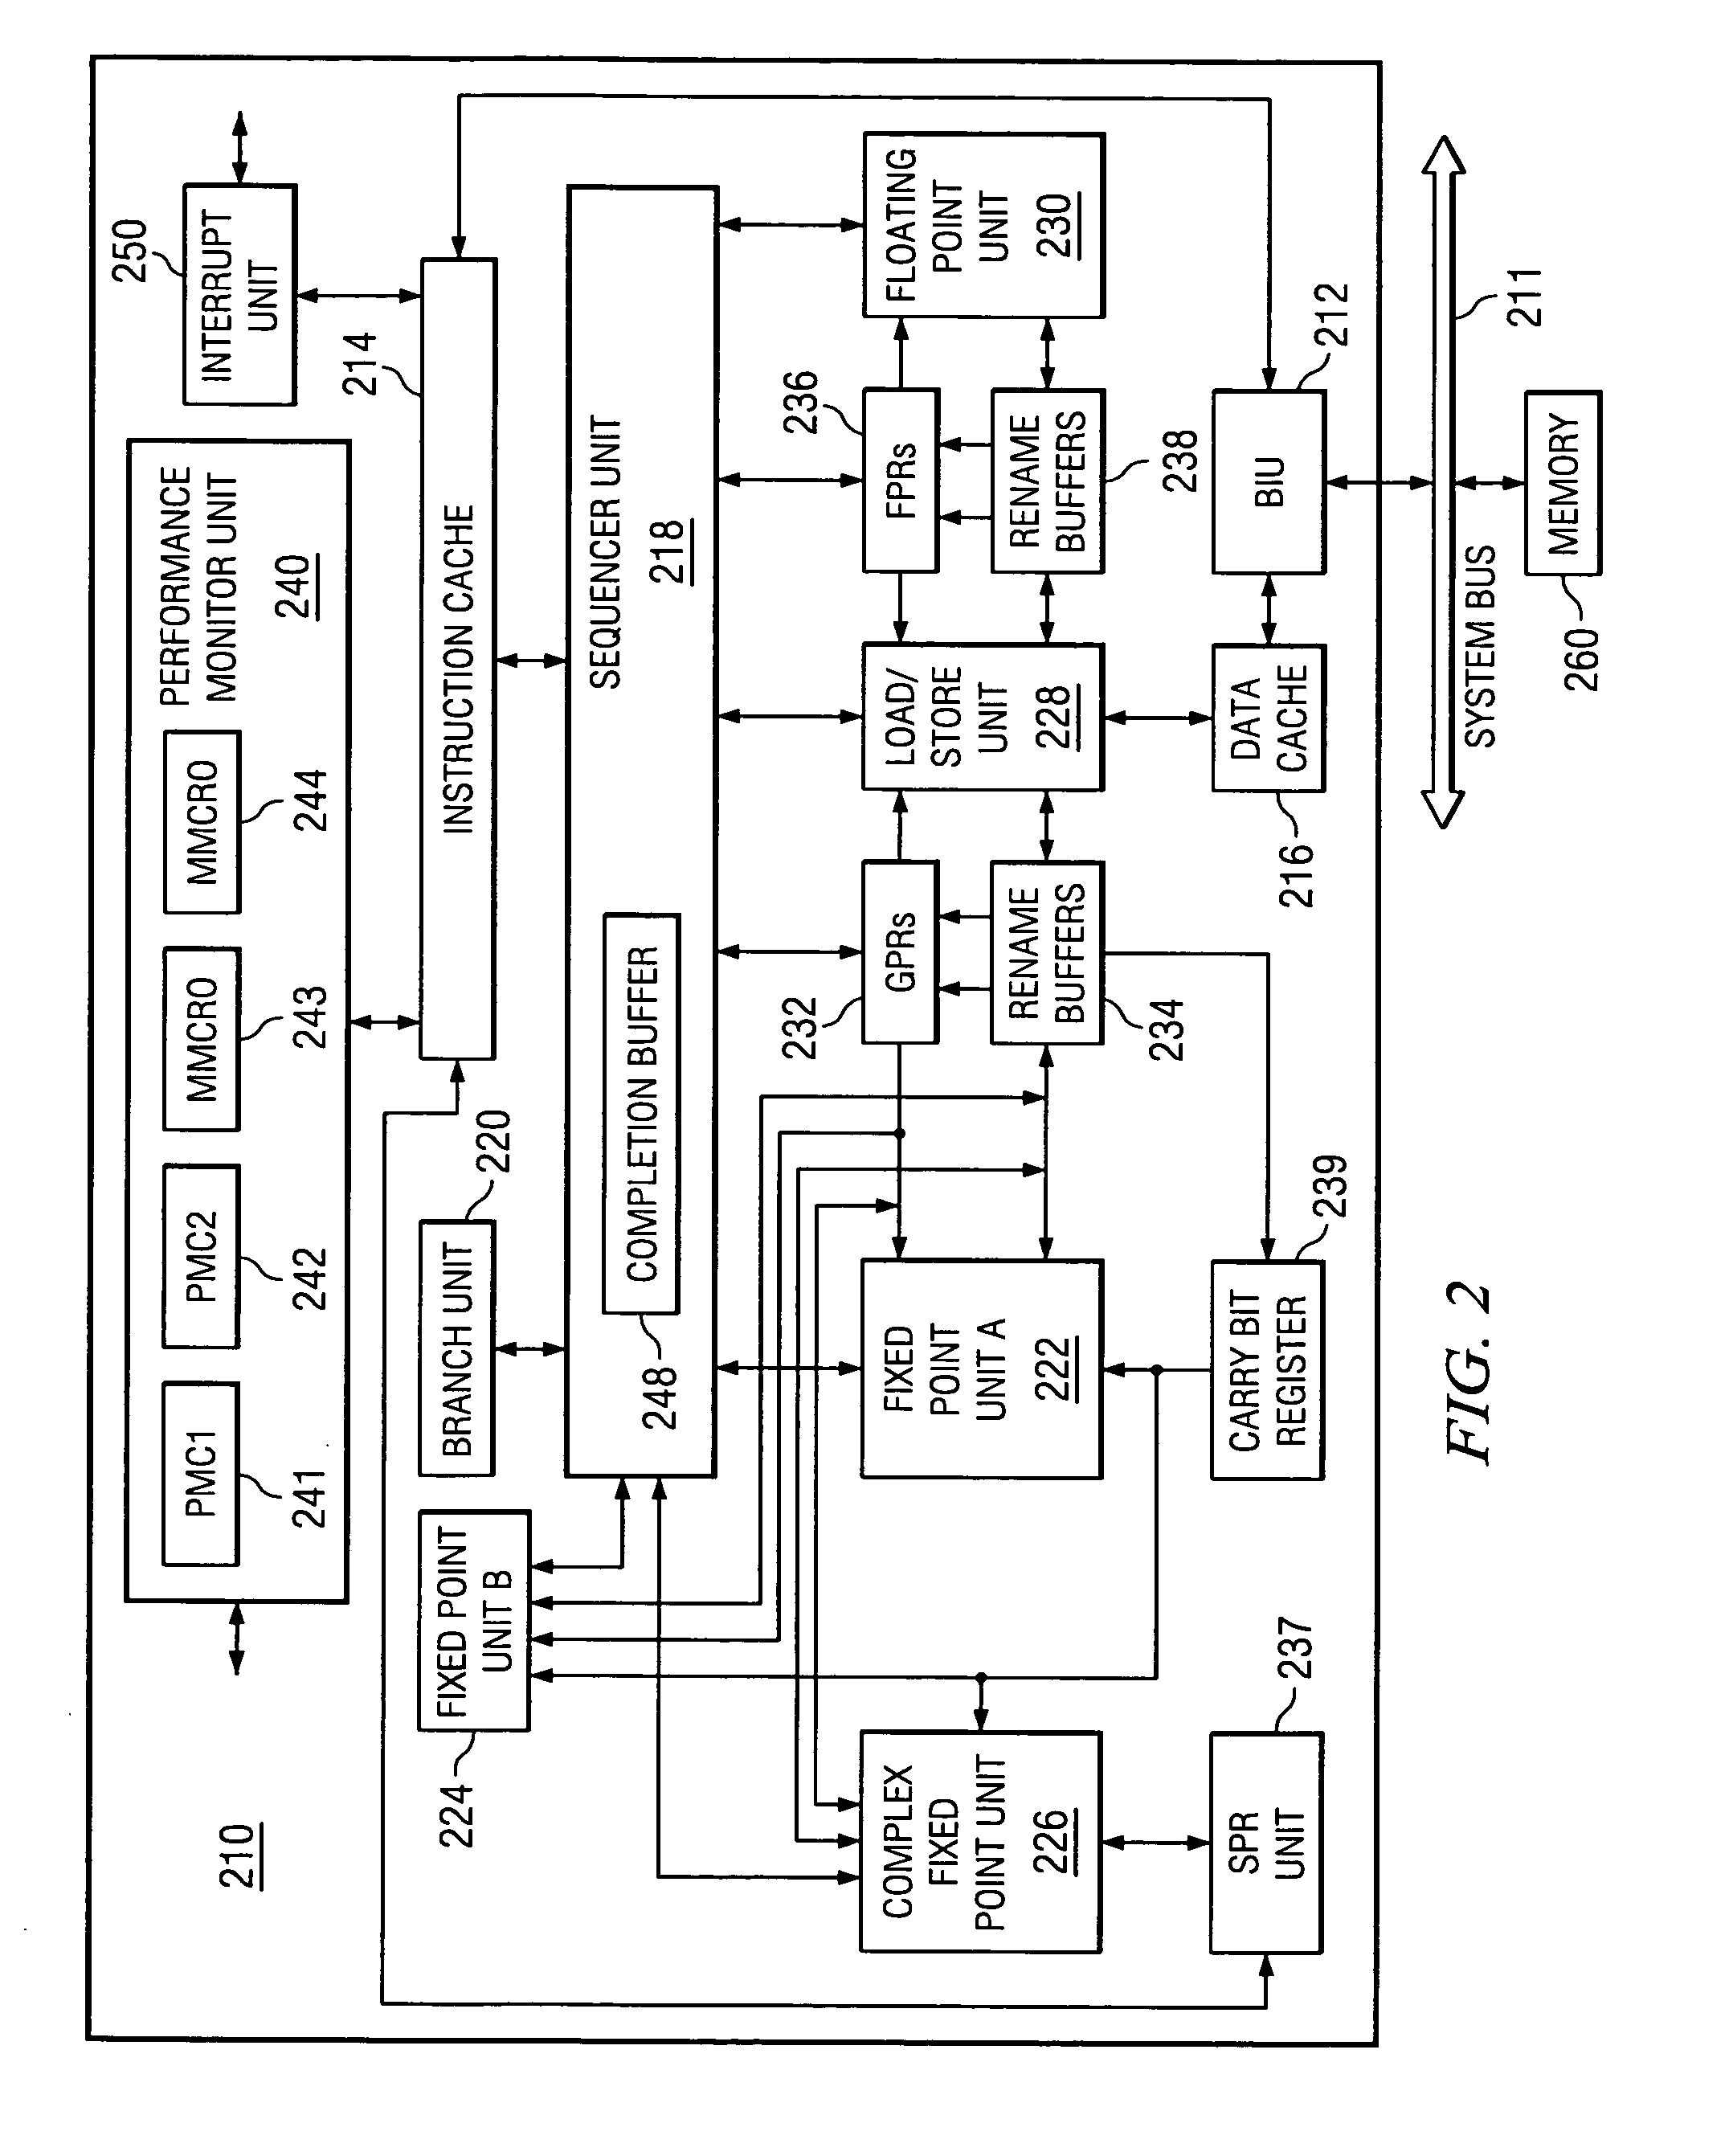 Method and apparatus for optimizing code execution using annotated trace information having performance indicator and counter information